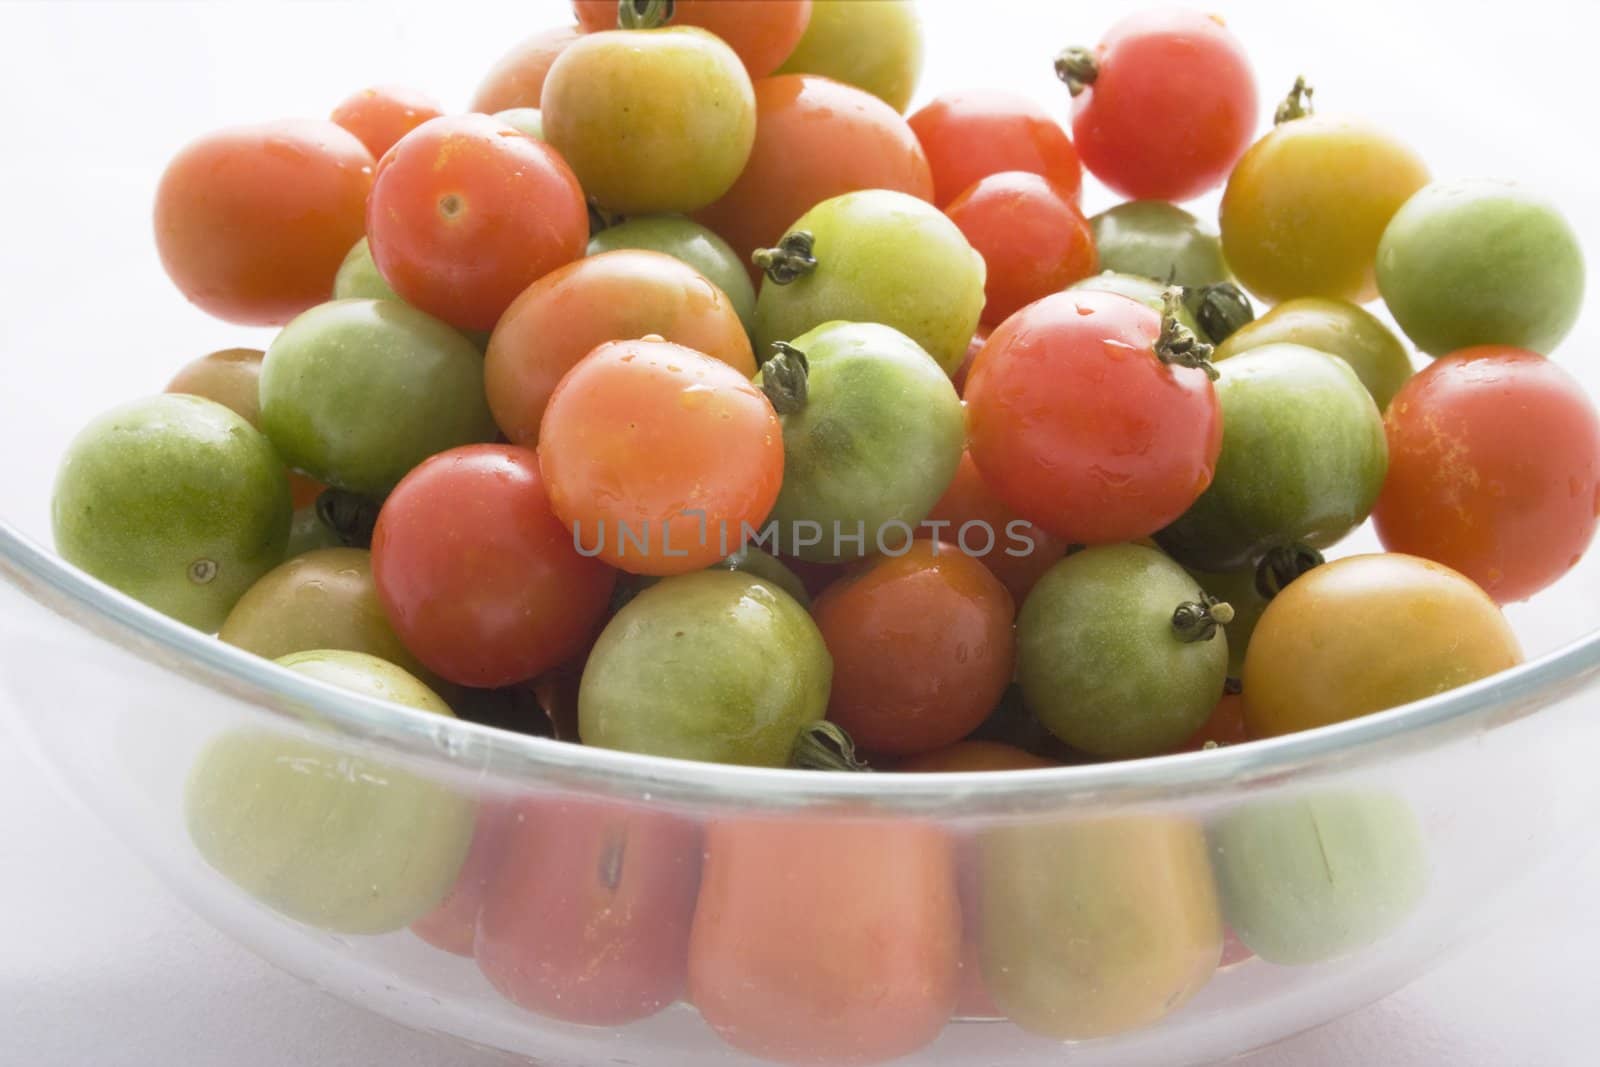 Cherry tomatoes fresh from the vine, in a glass bowl.  